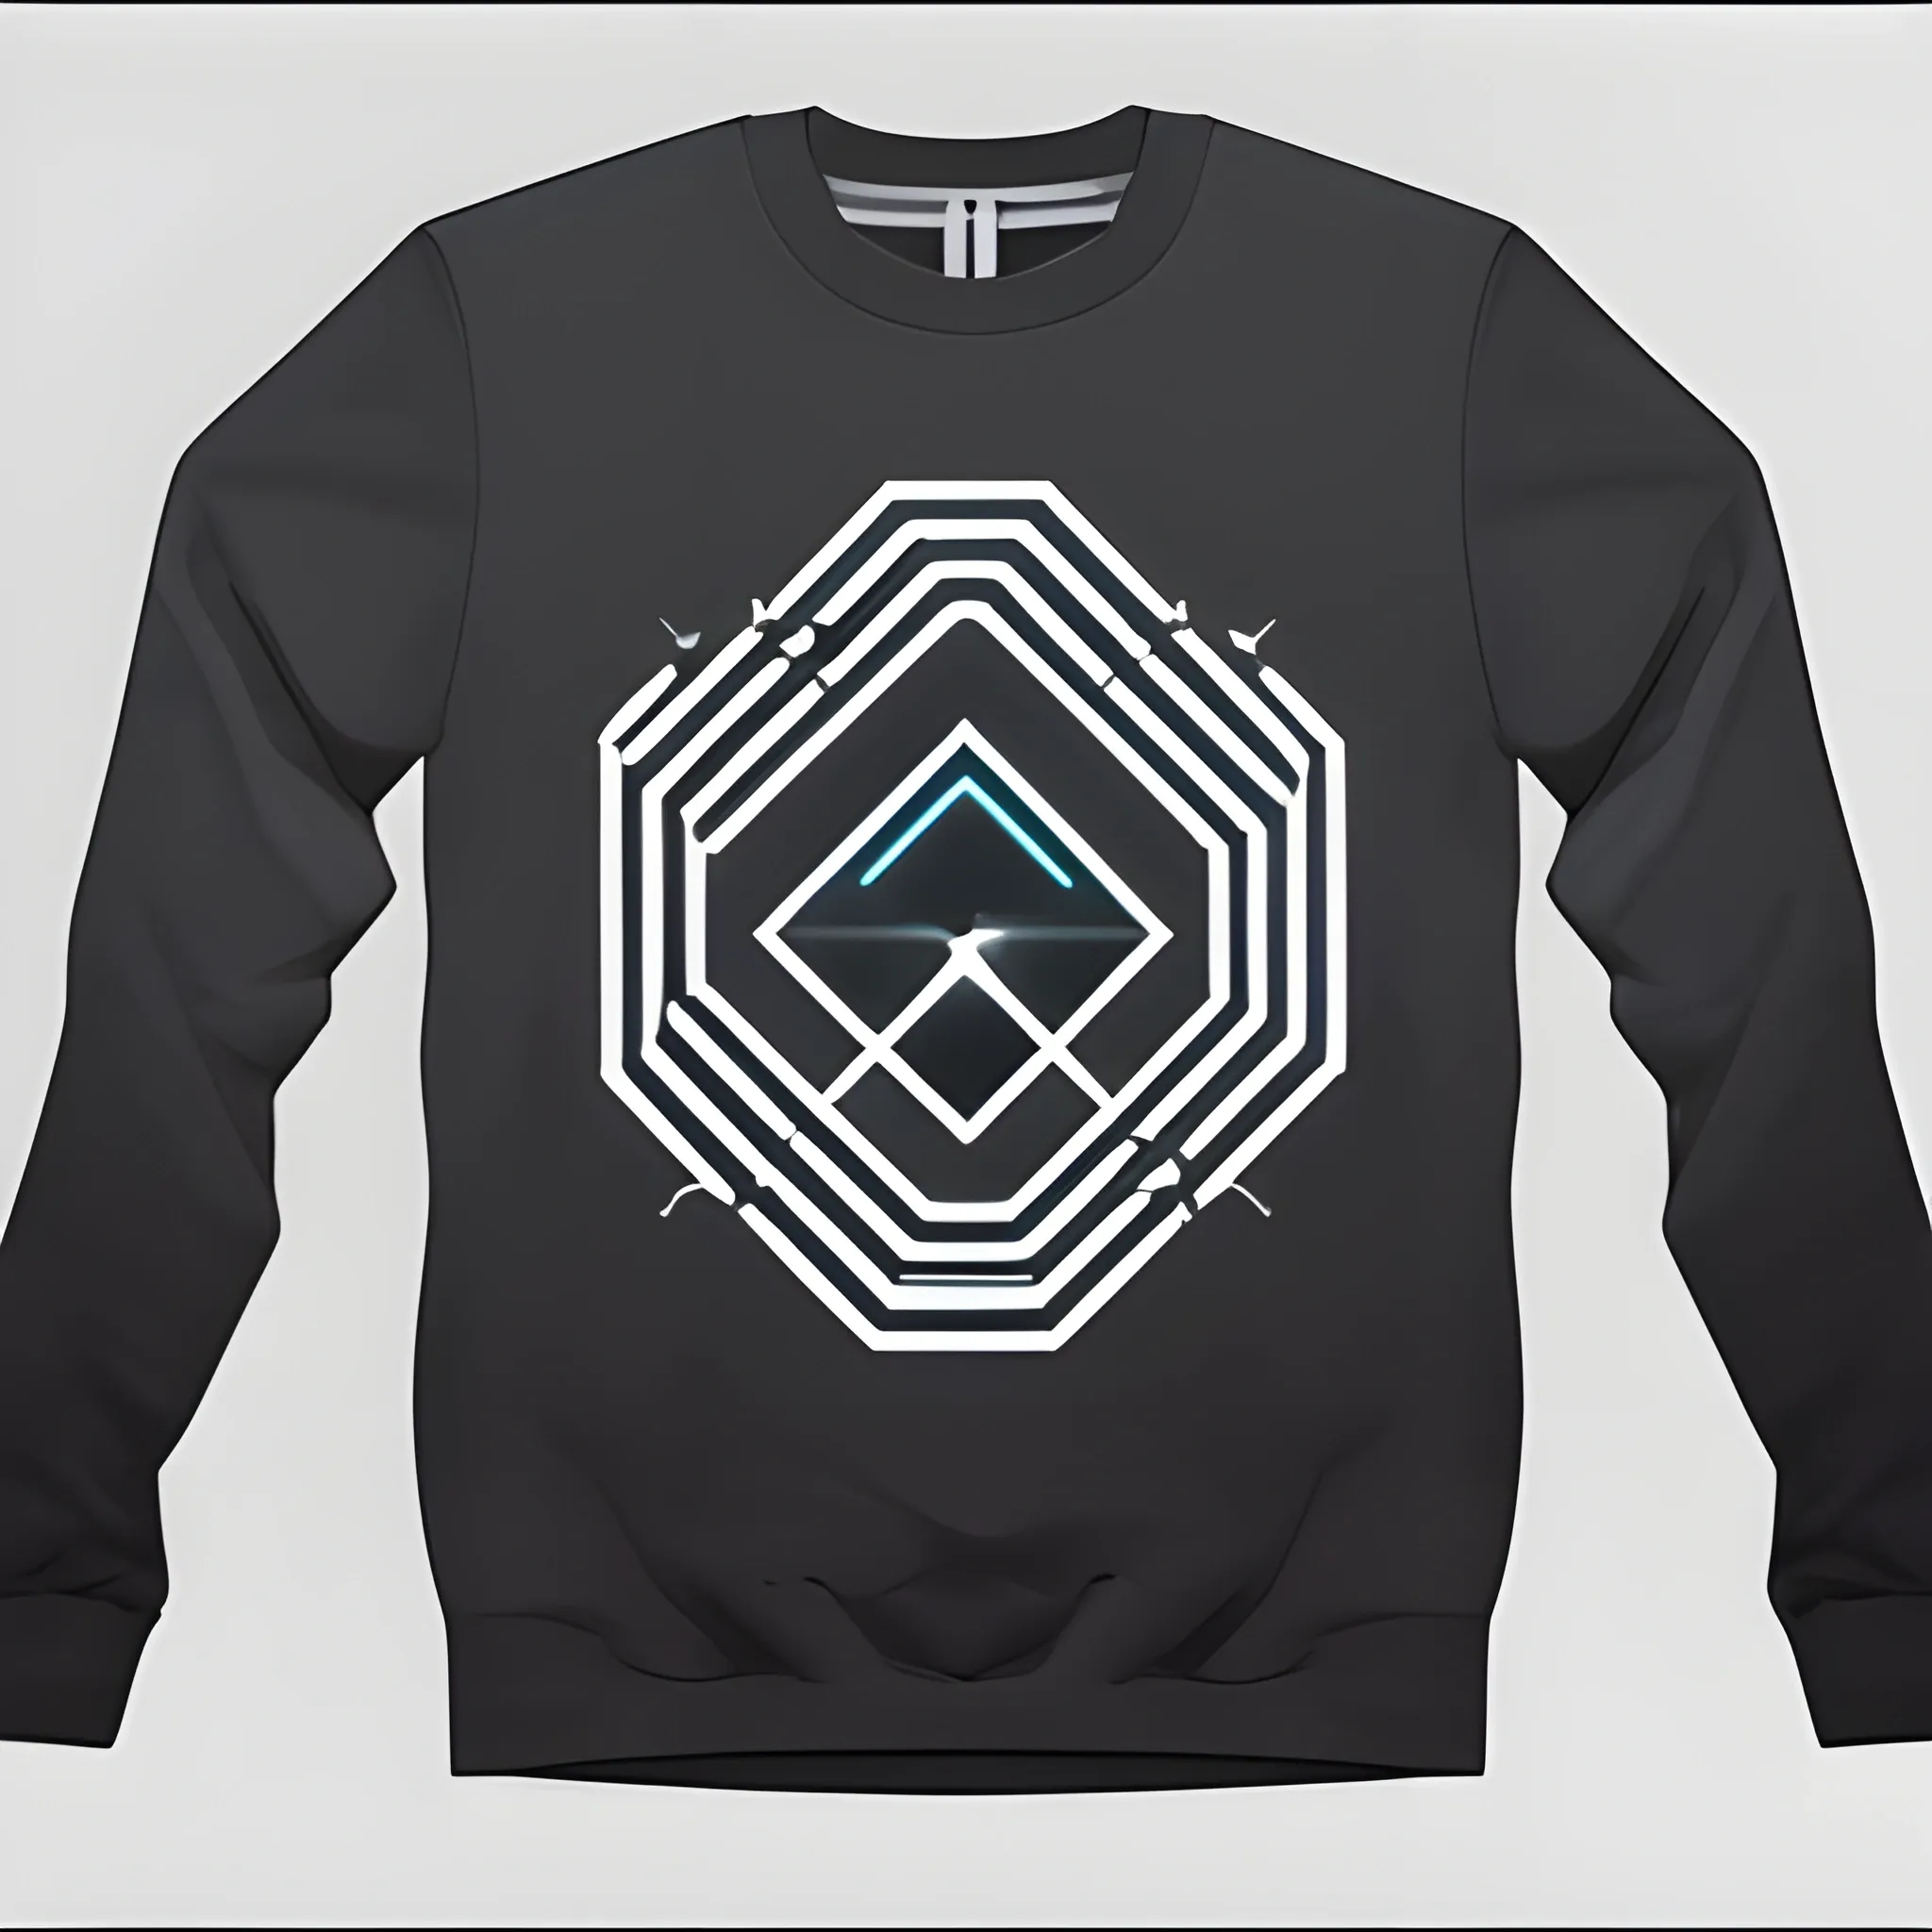 Design a minimalistic cyberpunk logo for "Threaded Pixel" clothing brand, incorporating geometric shapes and subtle tech-inspired elements. Keep it clean, recognizable, and versatile for different sizes and colors.